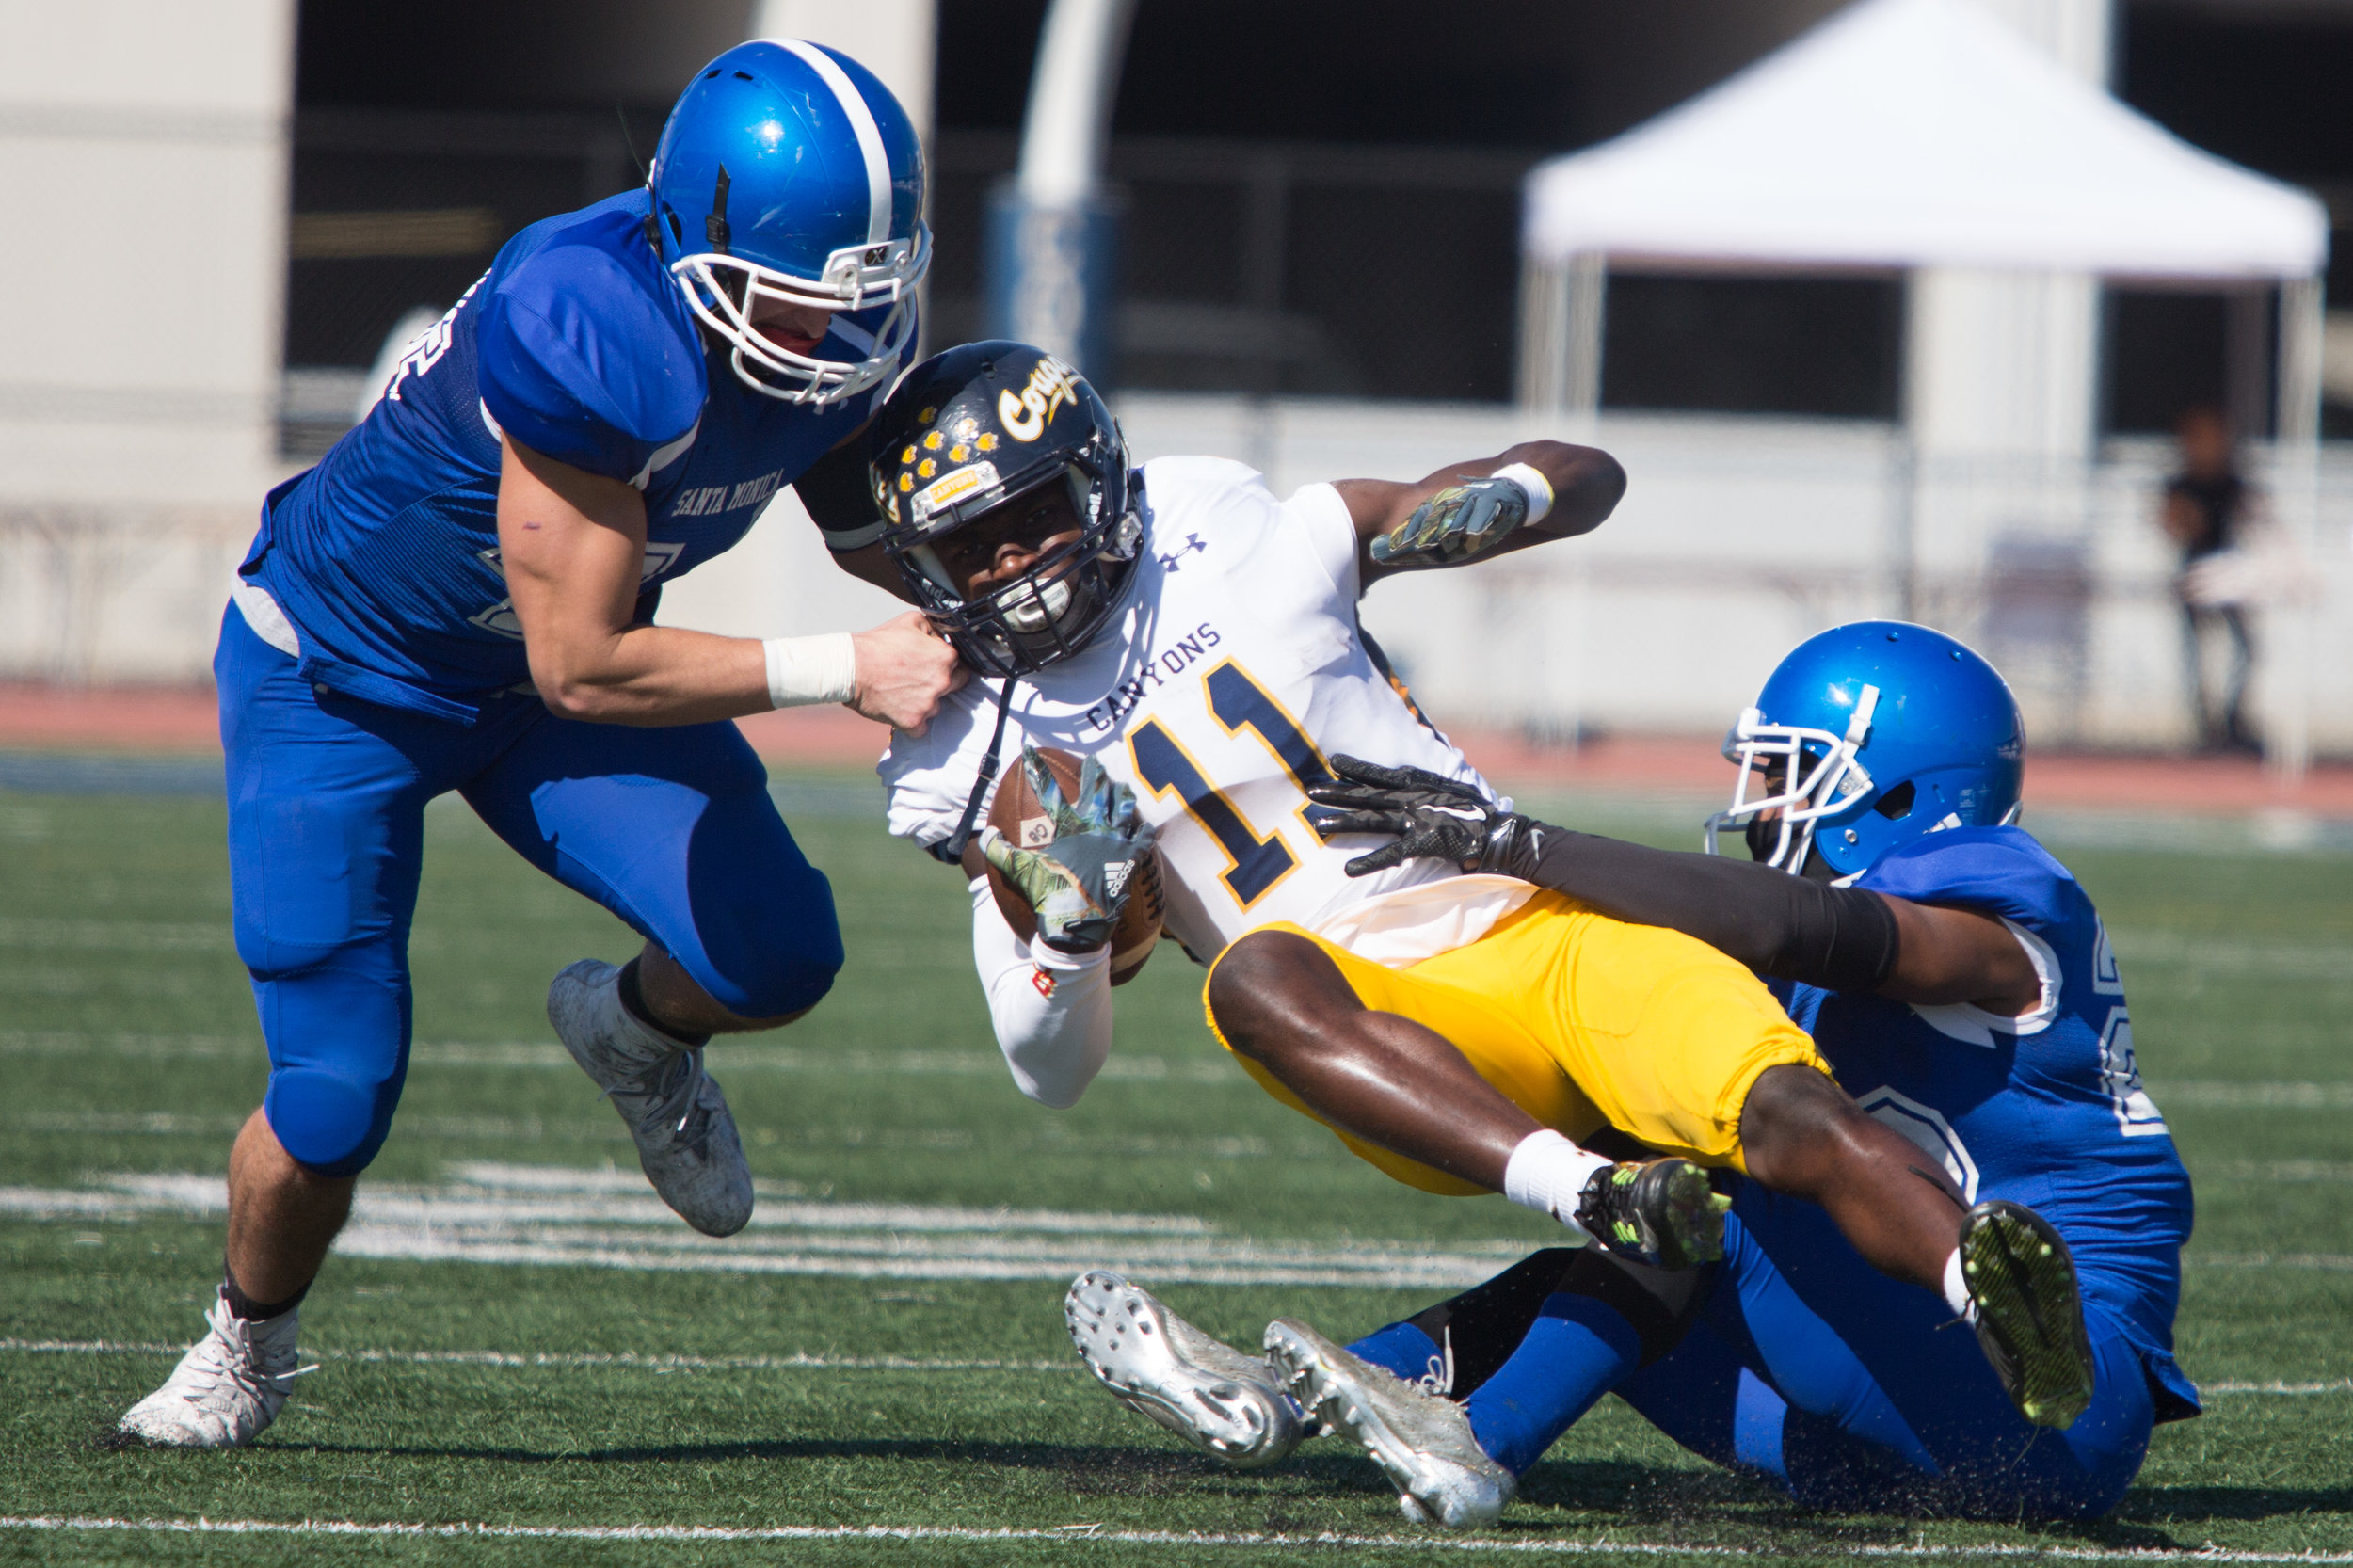  Linebacker Chris Wein (44, Left) and Defensive back Richard Harbor III (22, Right) of Santa Monica College Corsairs attempt to tackle Wide receiver Jarrin Pierce (11,Middle) of College of the Canyons Cougars during 2nd quarter of their homecoming ga